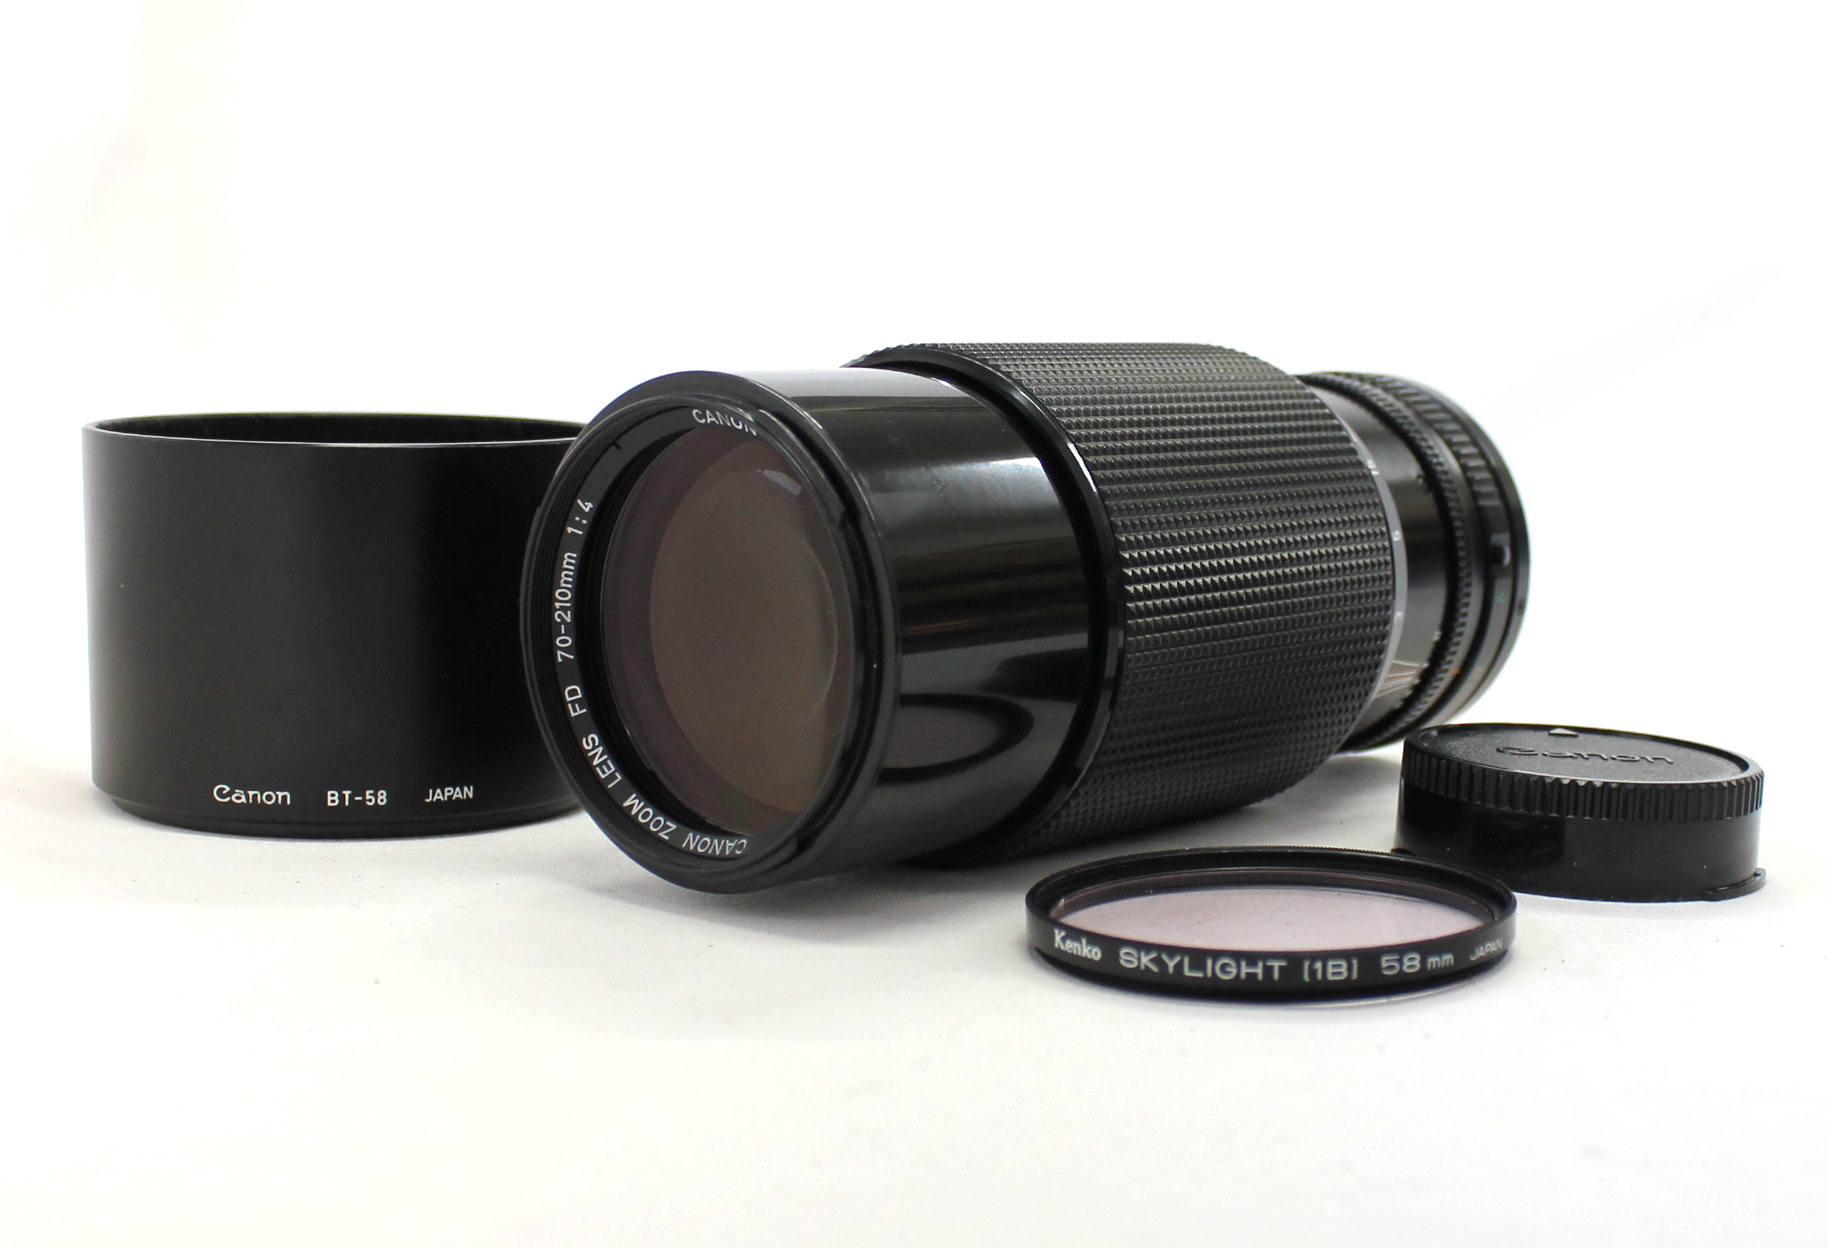 Japan Used Camera Shop | [Near Mint] Canon New FD NFD 70-210mm F4 Zoom Macro Lens with Lens Hood BT-58 from Japan